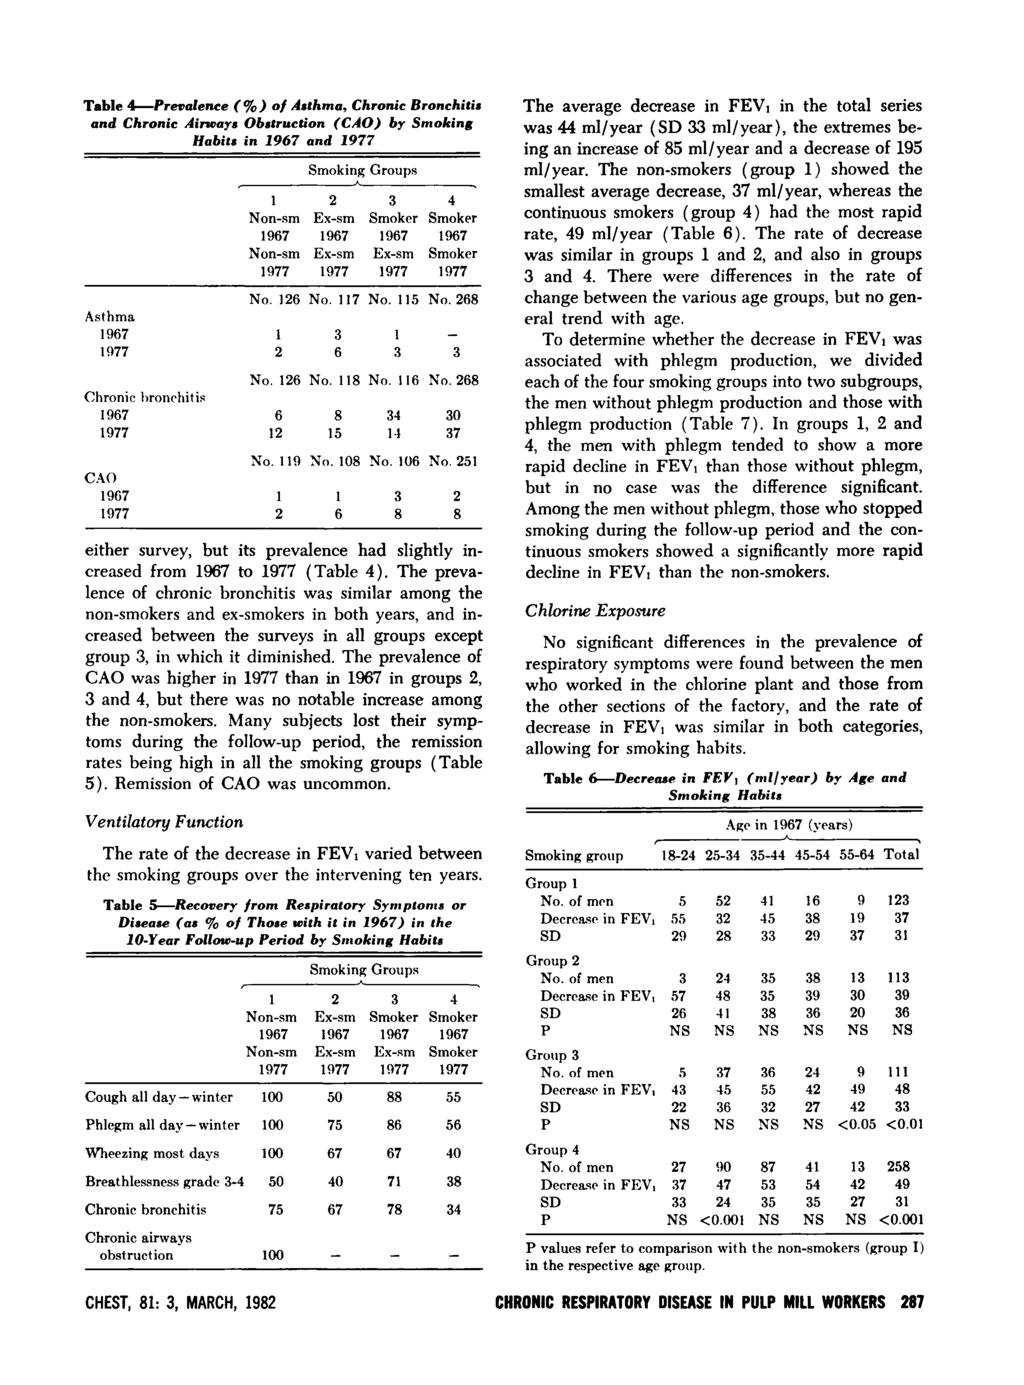 Table 4--Pre1'alenee (%) of sthma, Chronic Bronchitis and Chronic irways Obstruction (CO) by Smoking Habits in 1967 and 1977 1 234 Non-sm Ex-sm Ex-sm Smoker 1977 1977 1977 ]977 No. 126 No. 117 No.